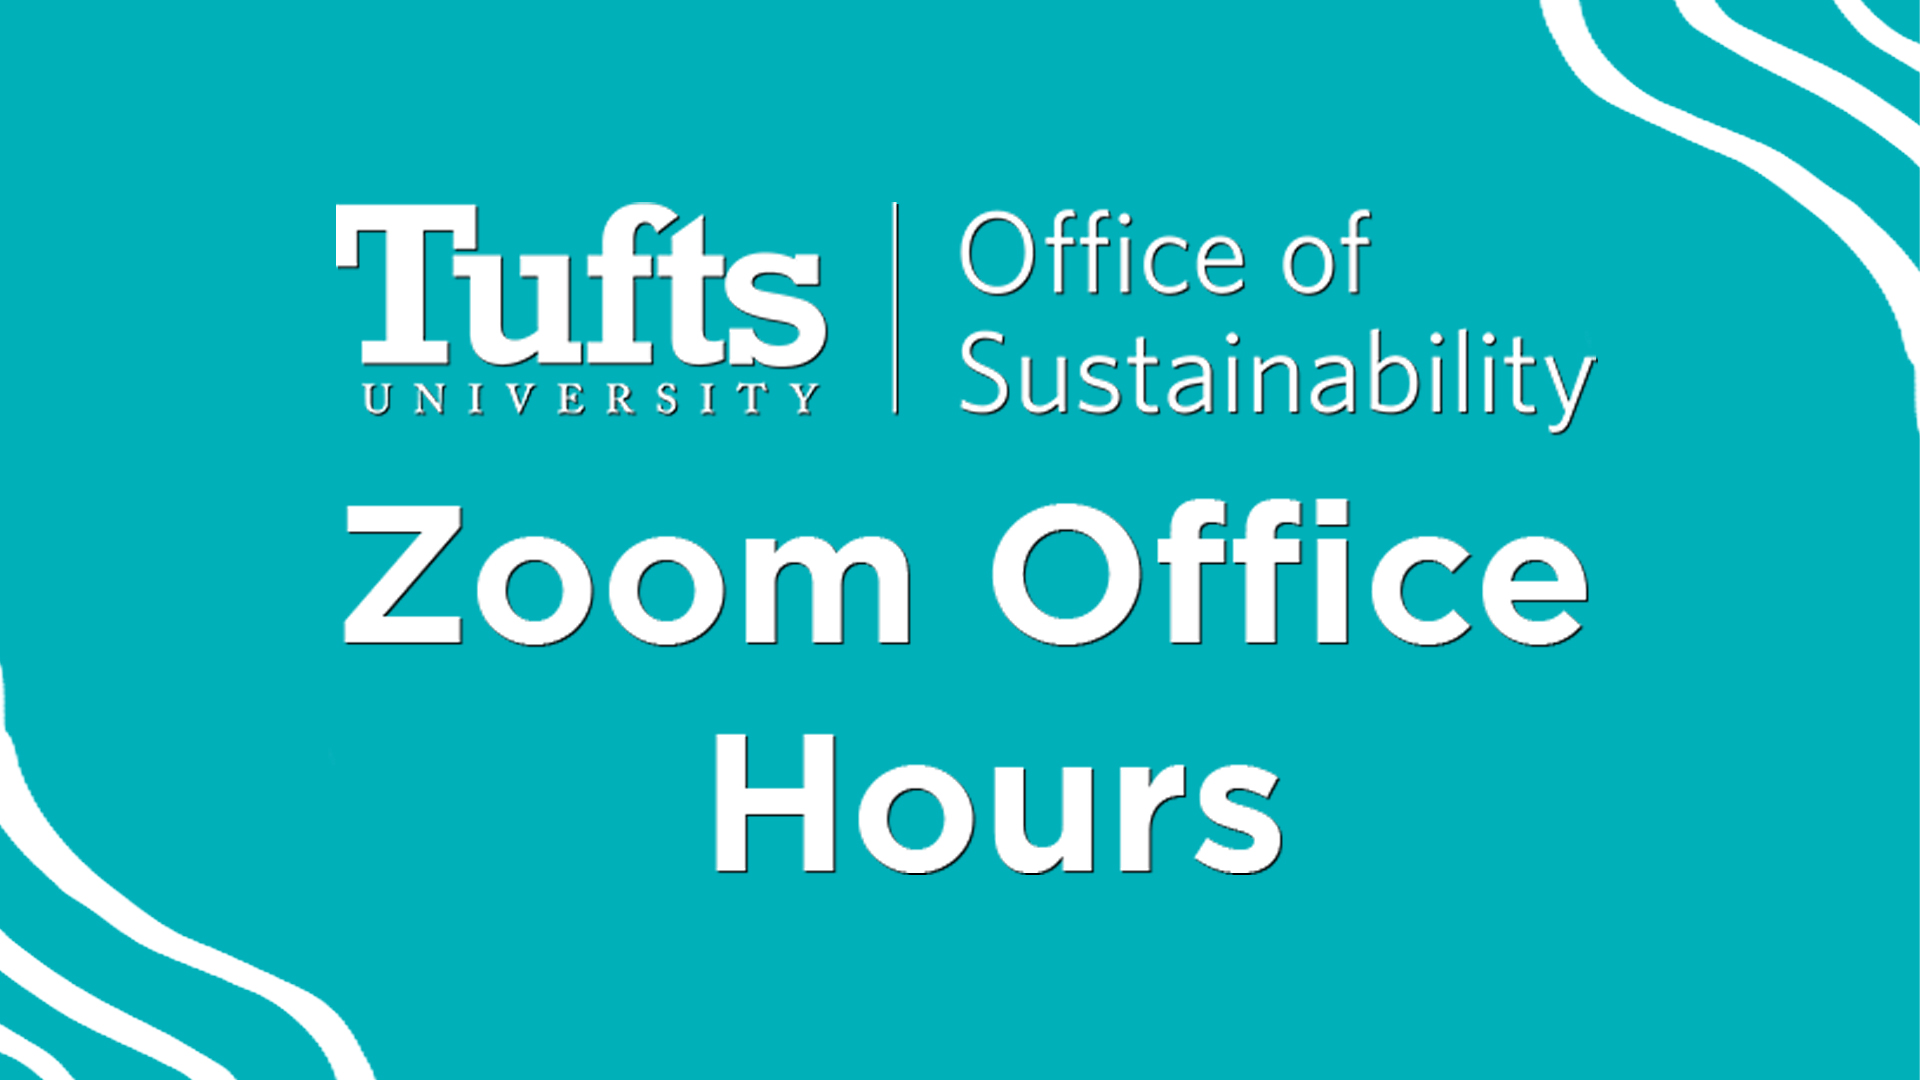 Green-Blue title card reading "Tufts Office of Sustainability, Zoom Office Hours"